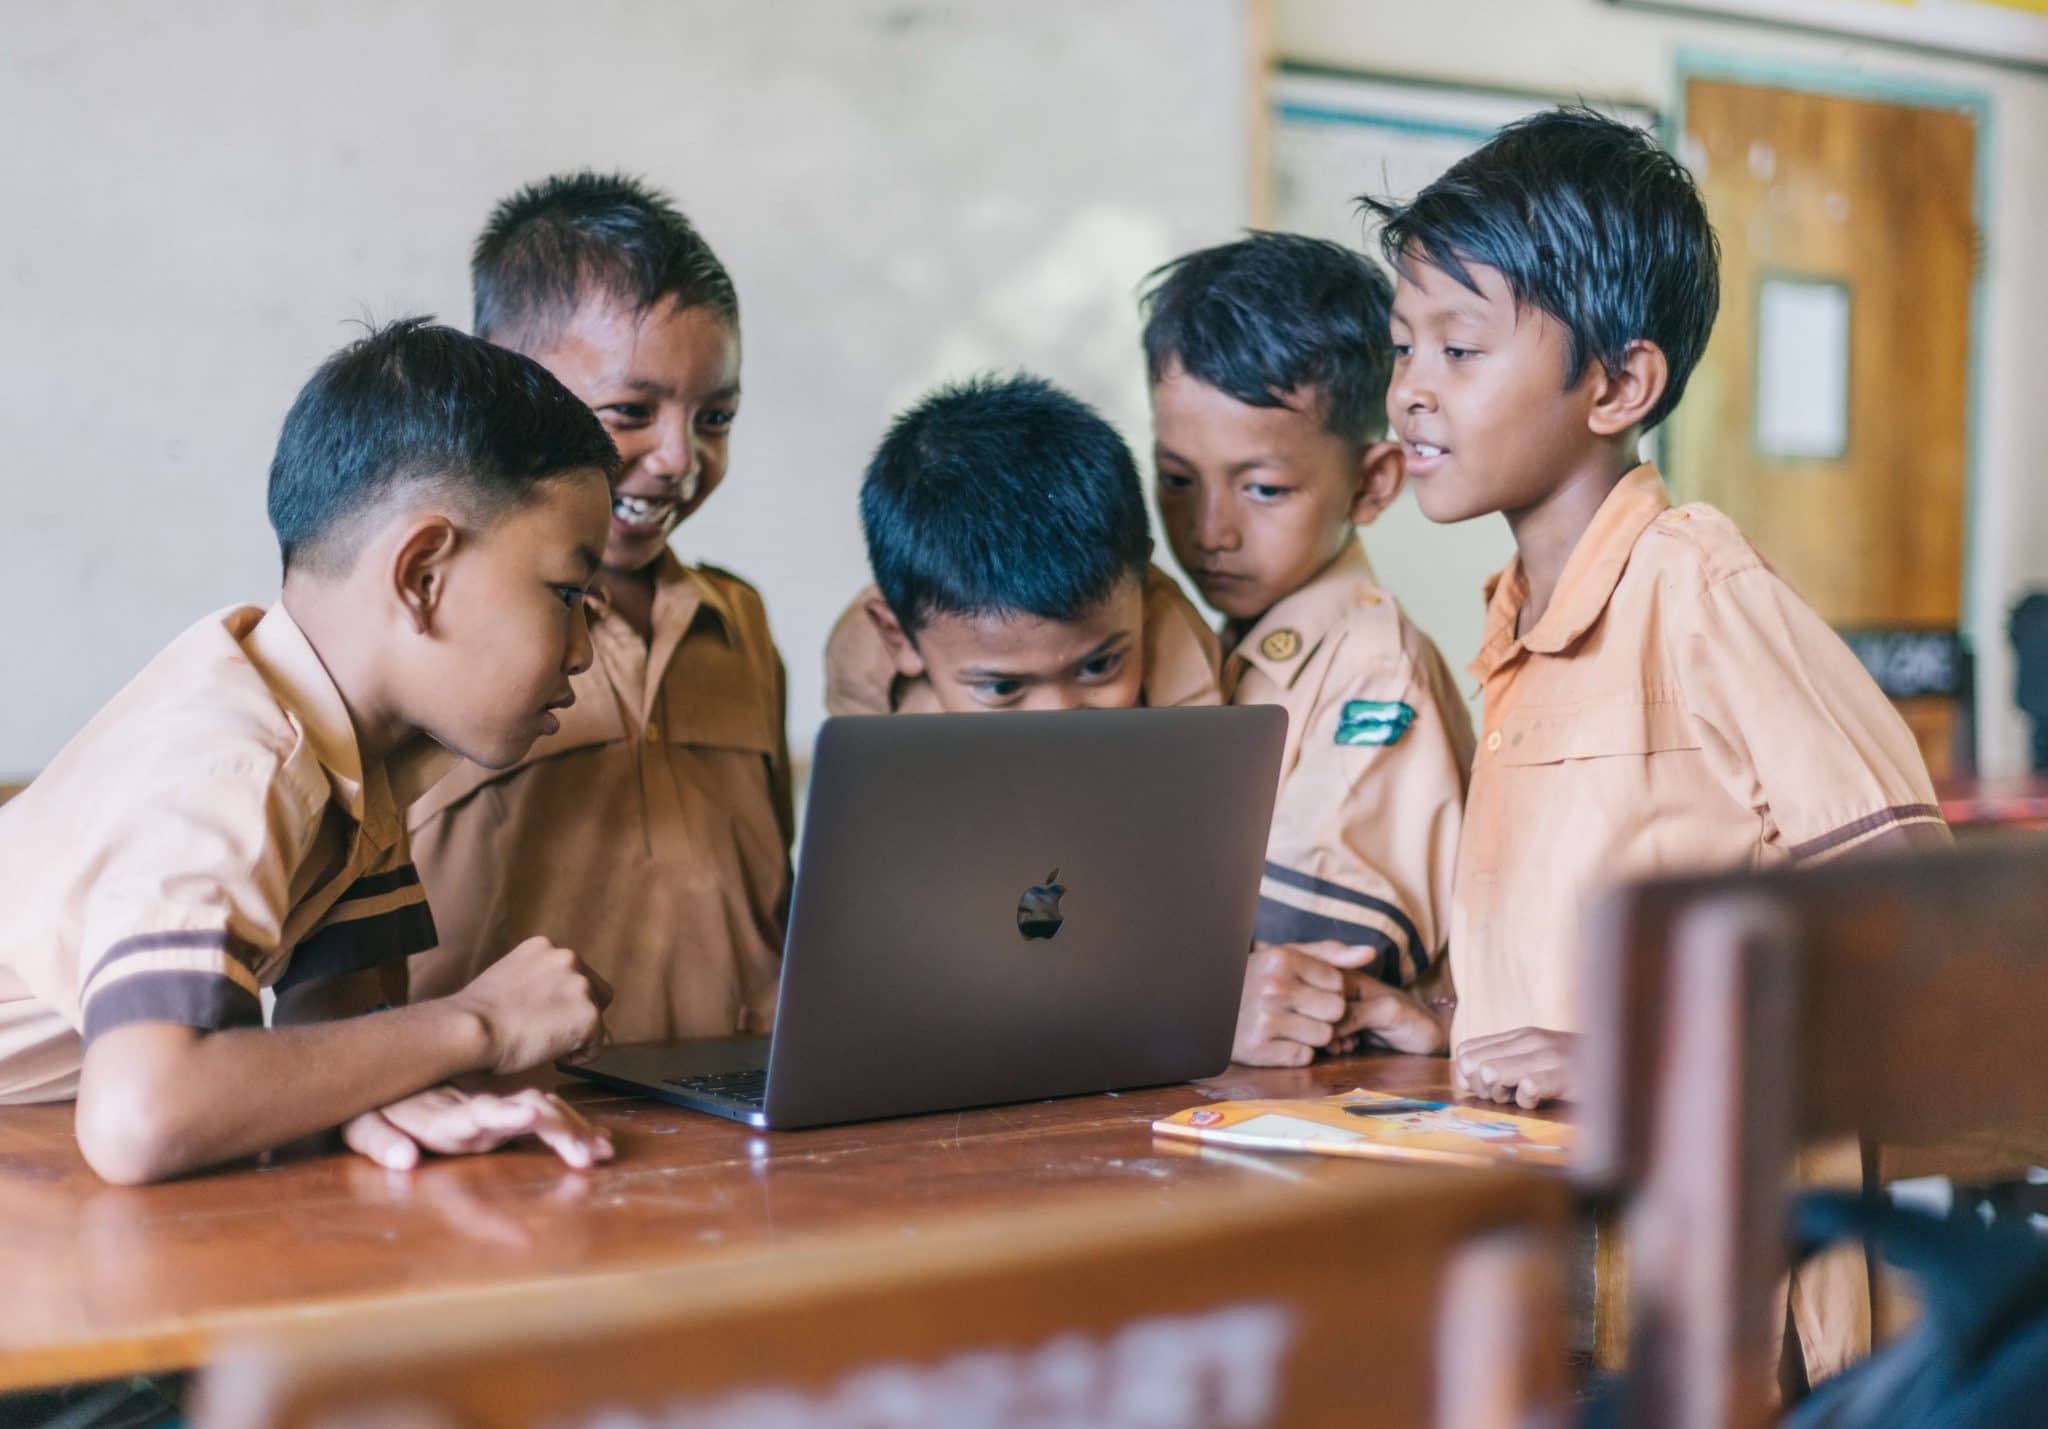 Group of young boys learning to code